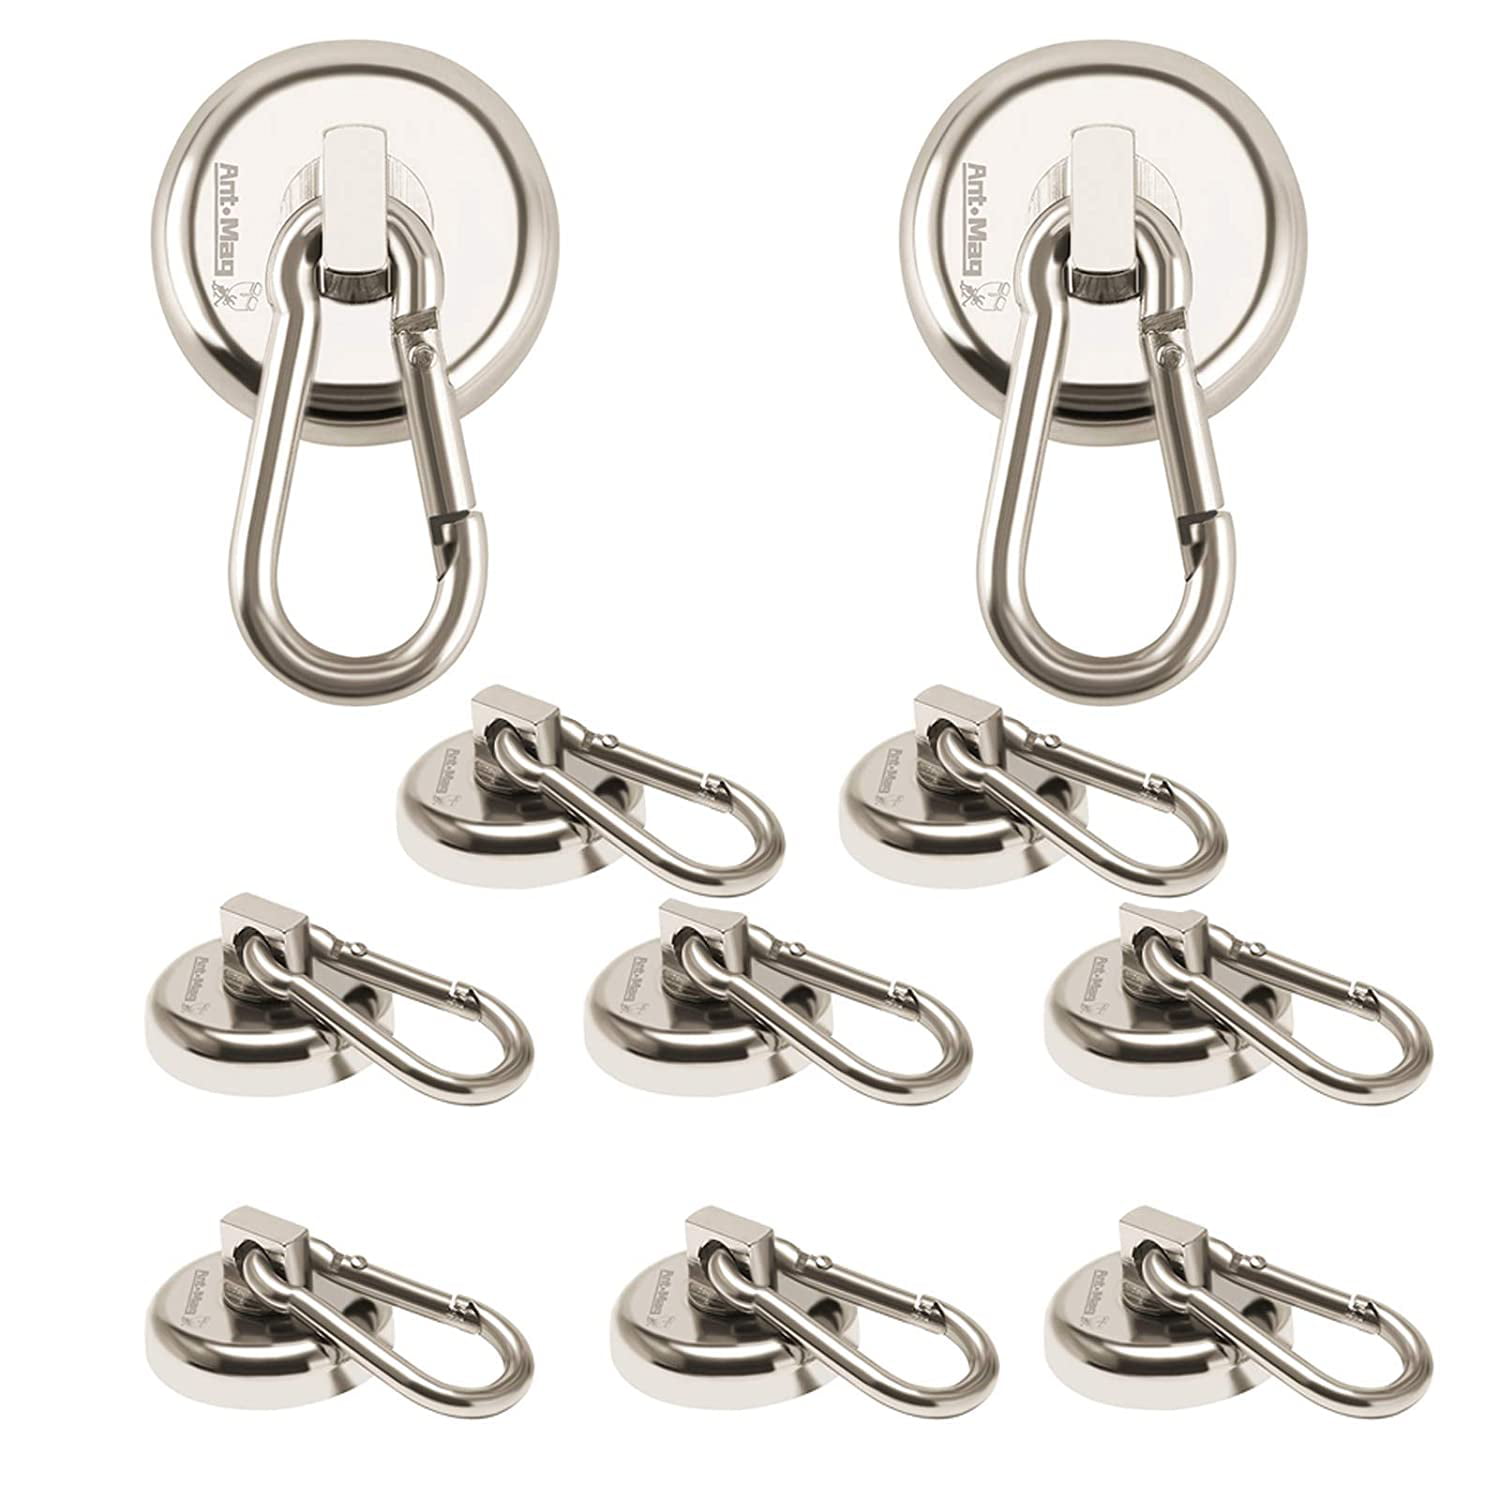 Carabiner Magnetic Hooks 80LBS Heavy Duty Neodymium Magnet Carabiner with Swivel Carabiner Snap Hook for Indoor/Outdoor Hanging Bagnet Grill Kitchen Purse Factory Warehouse Office 4 Pack 